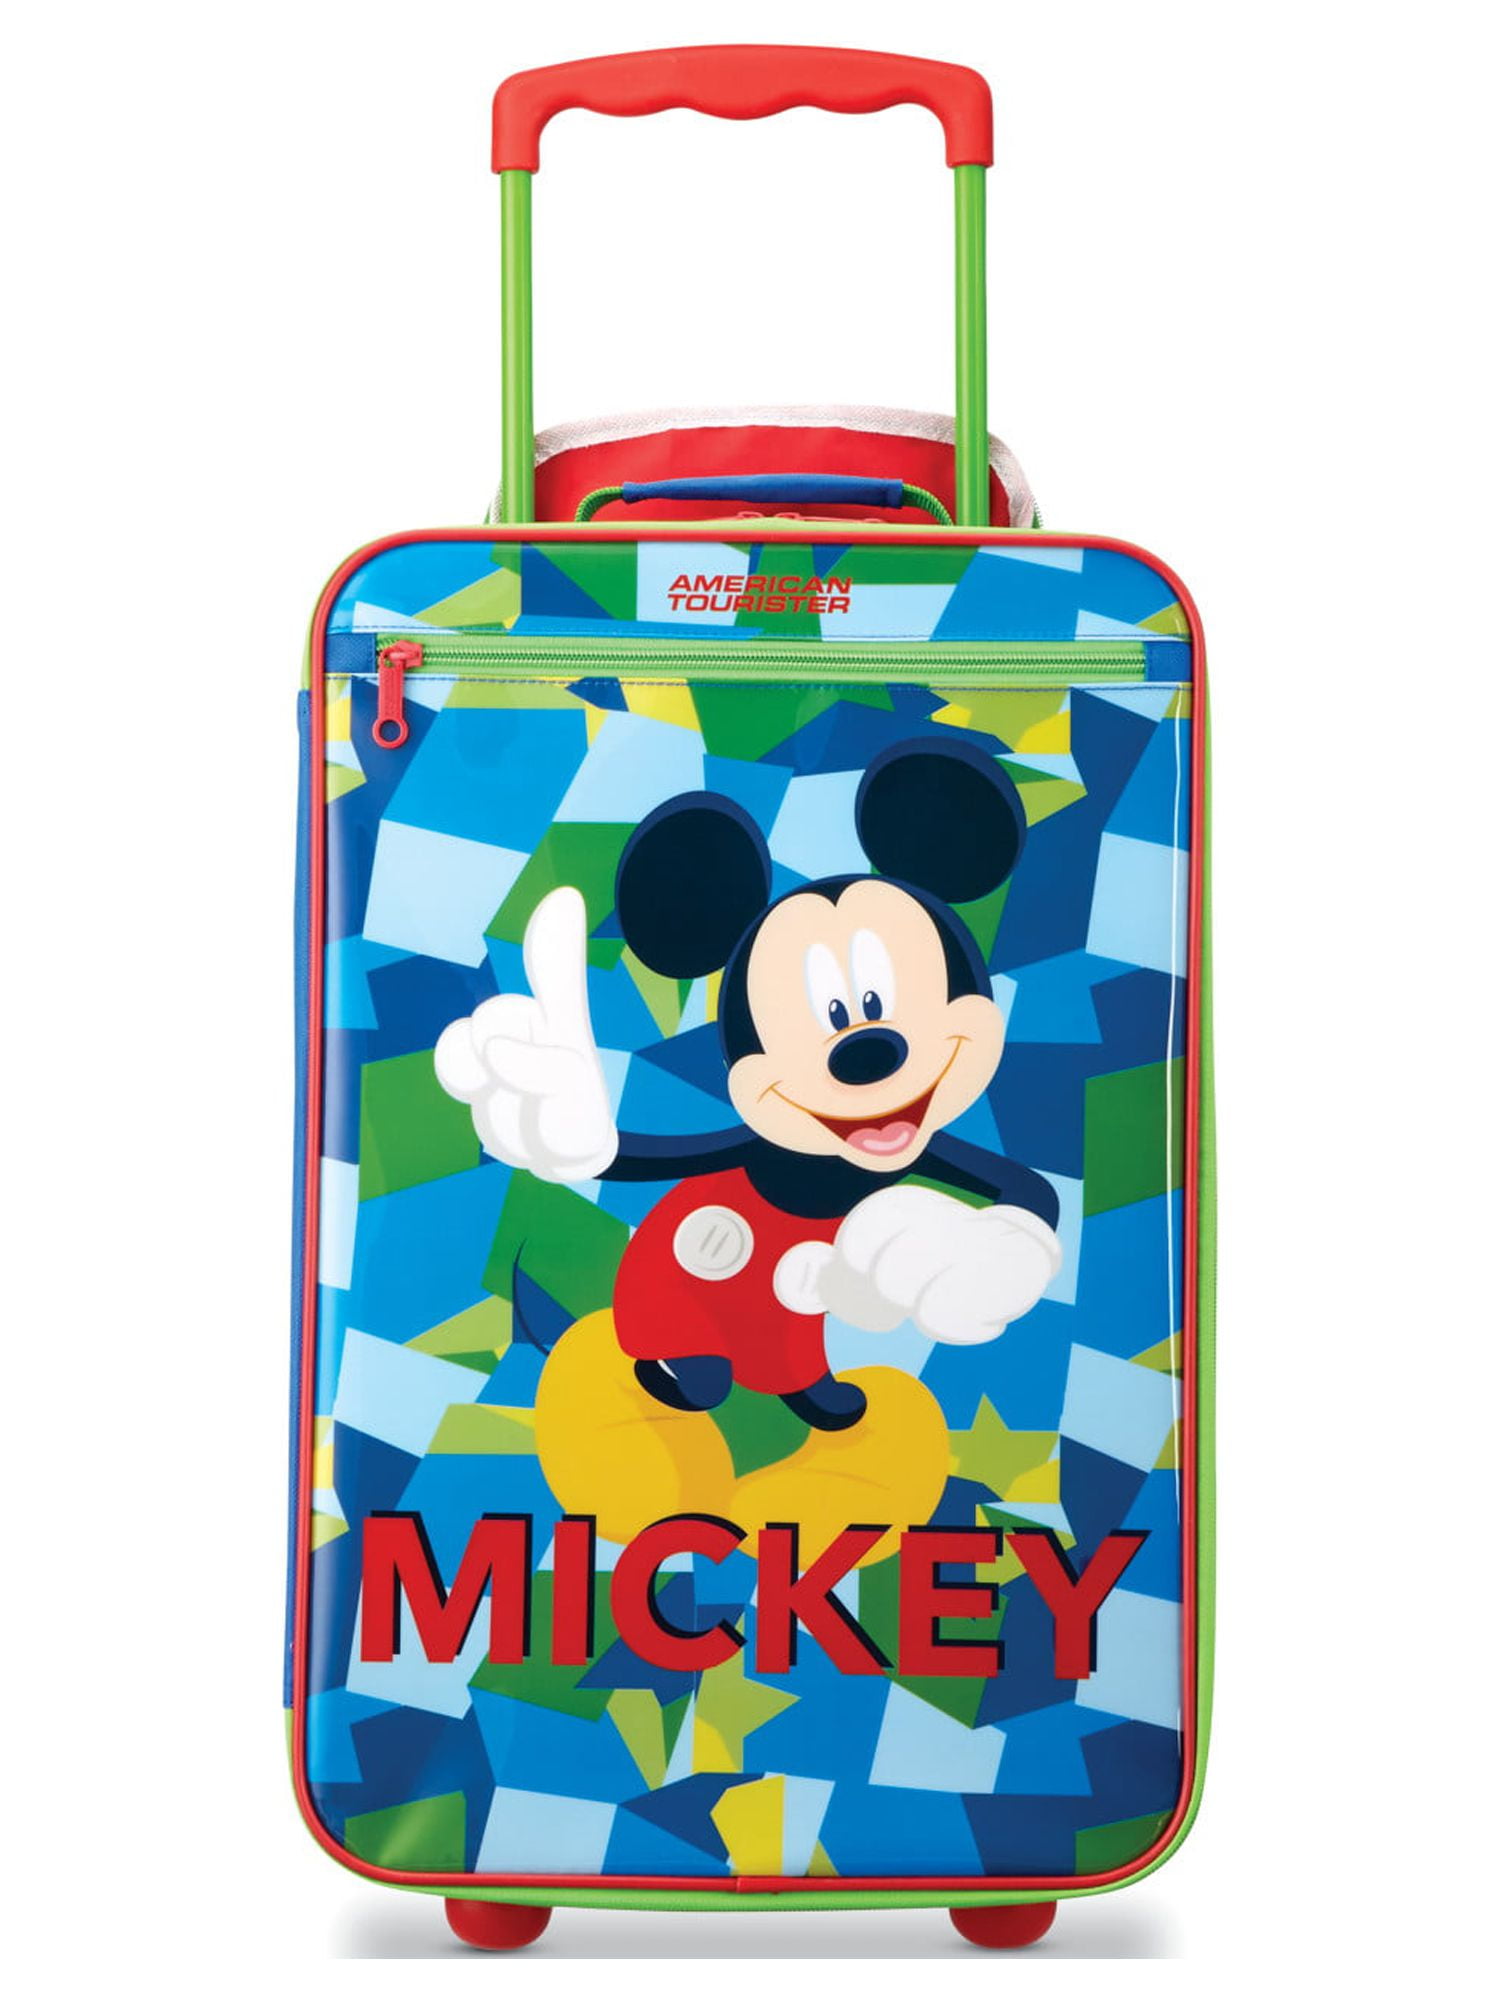 Mickey Mouse Disney Parks Rolling Luggage – Small – 18